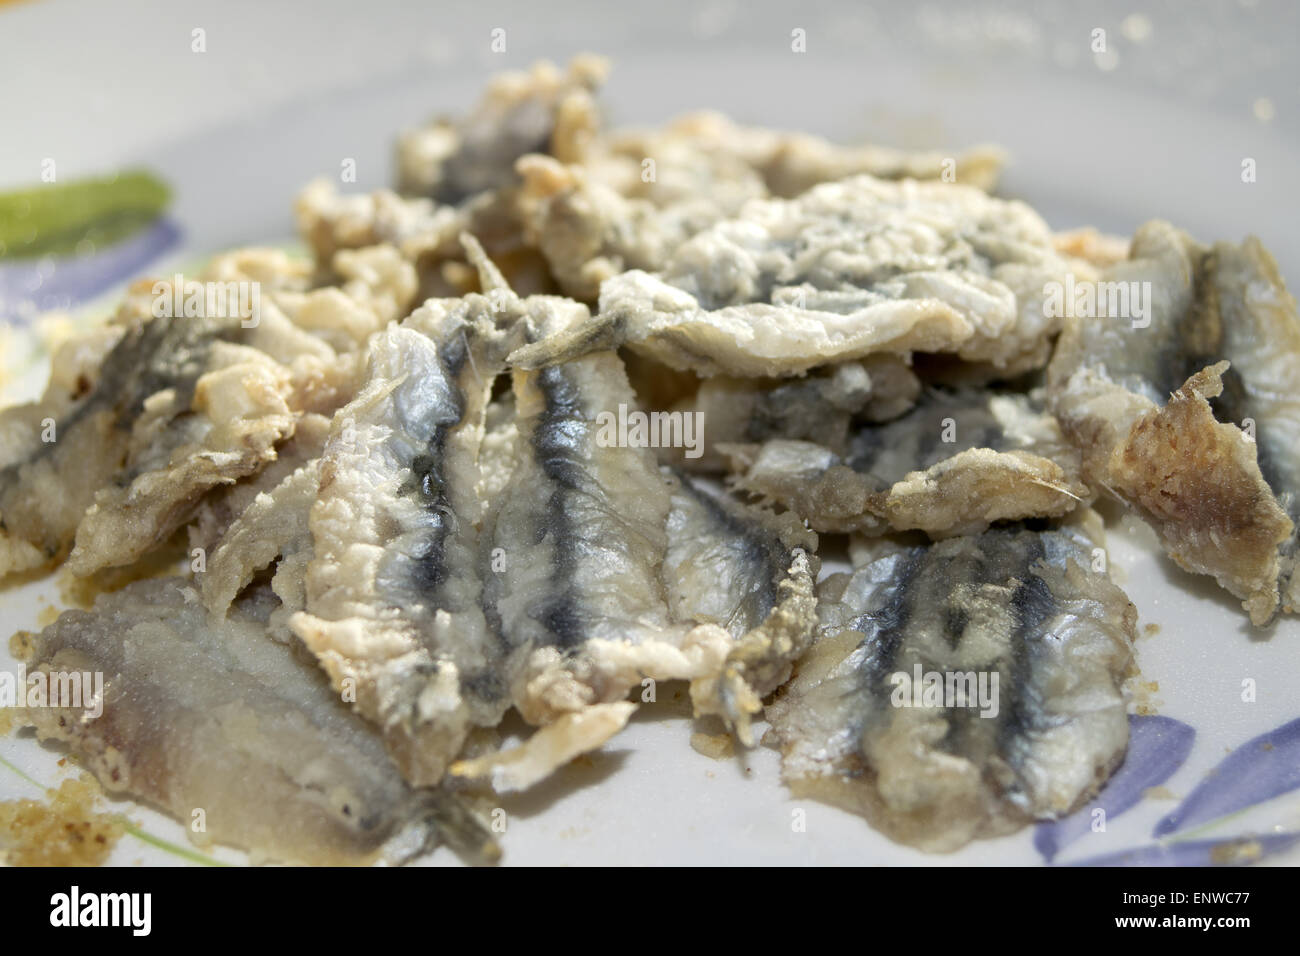 fried anchovy flapjacks with fresh fish of the mediterranean sea Stock Photo